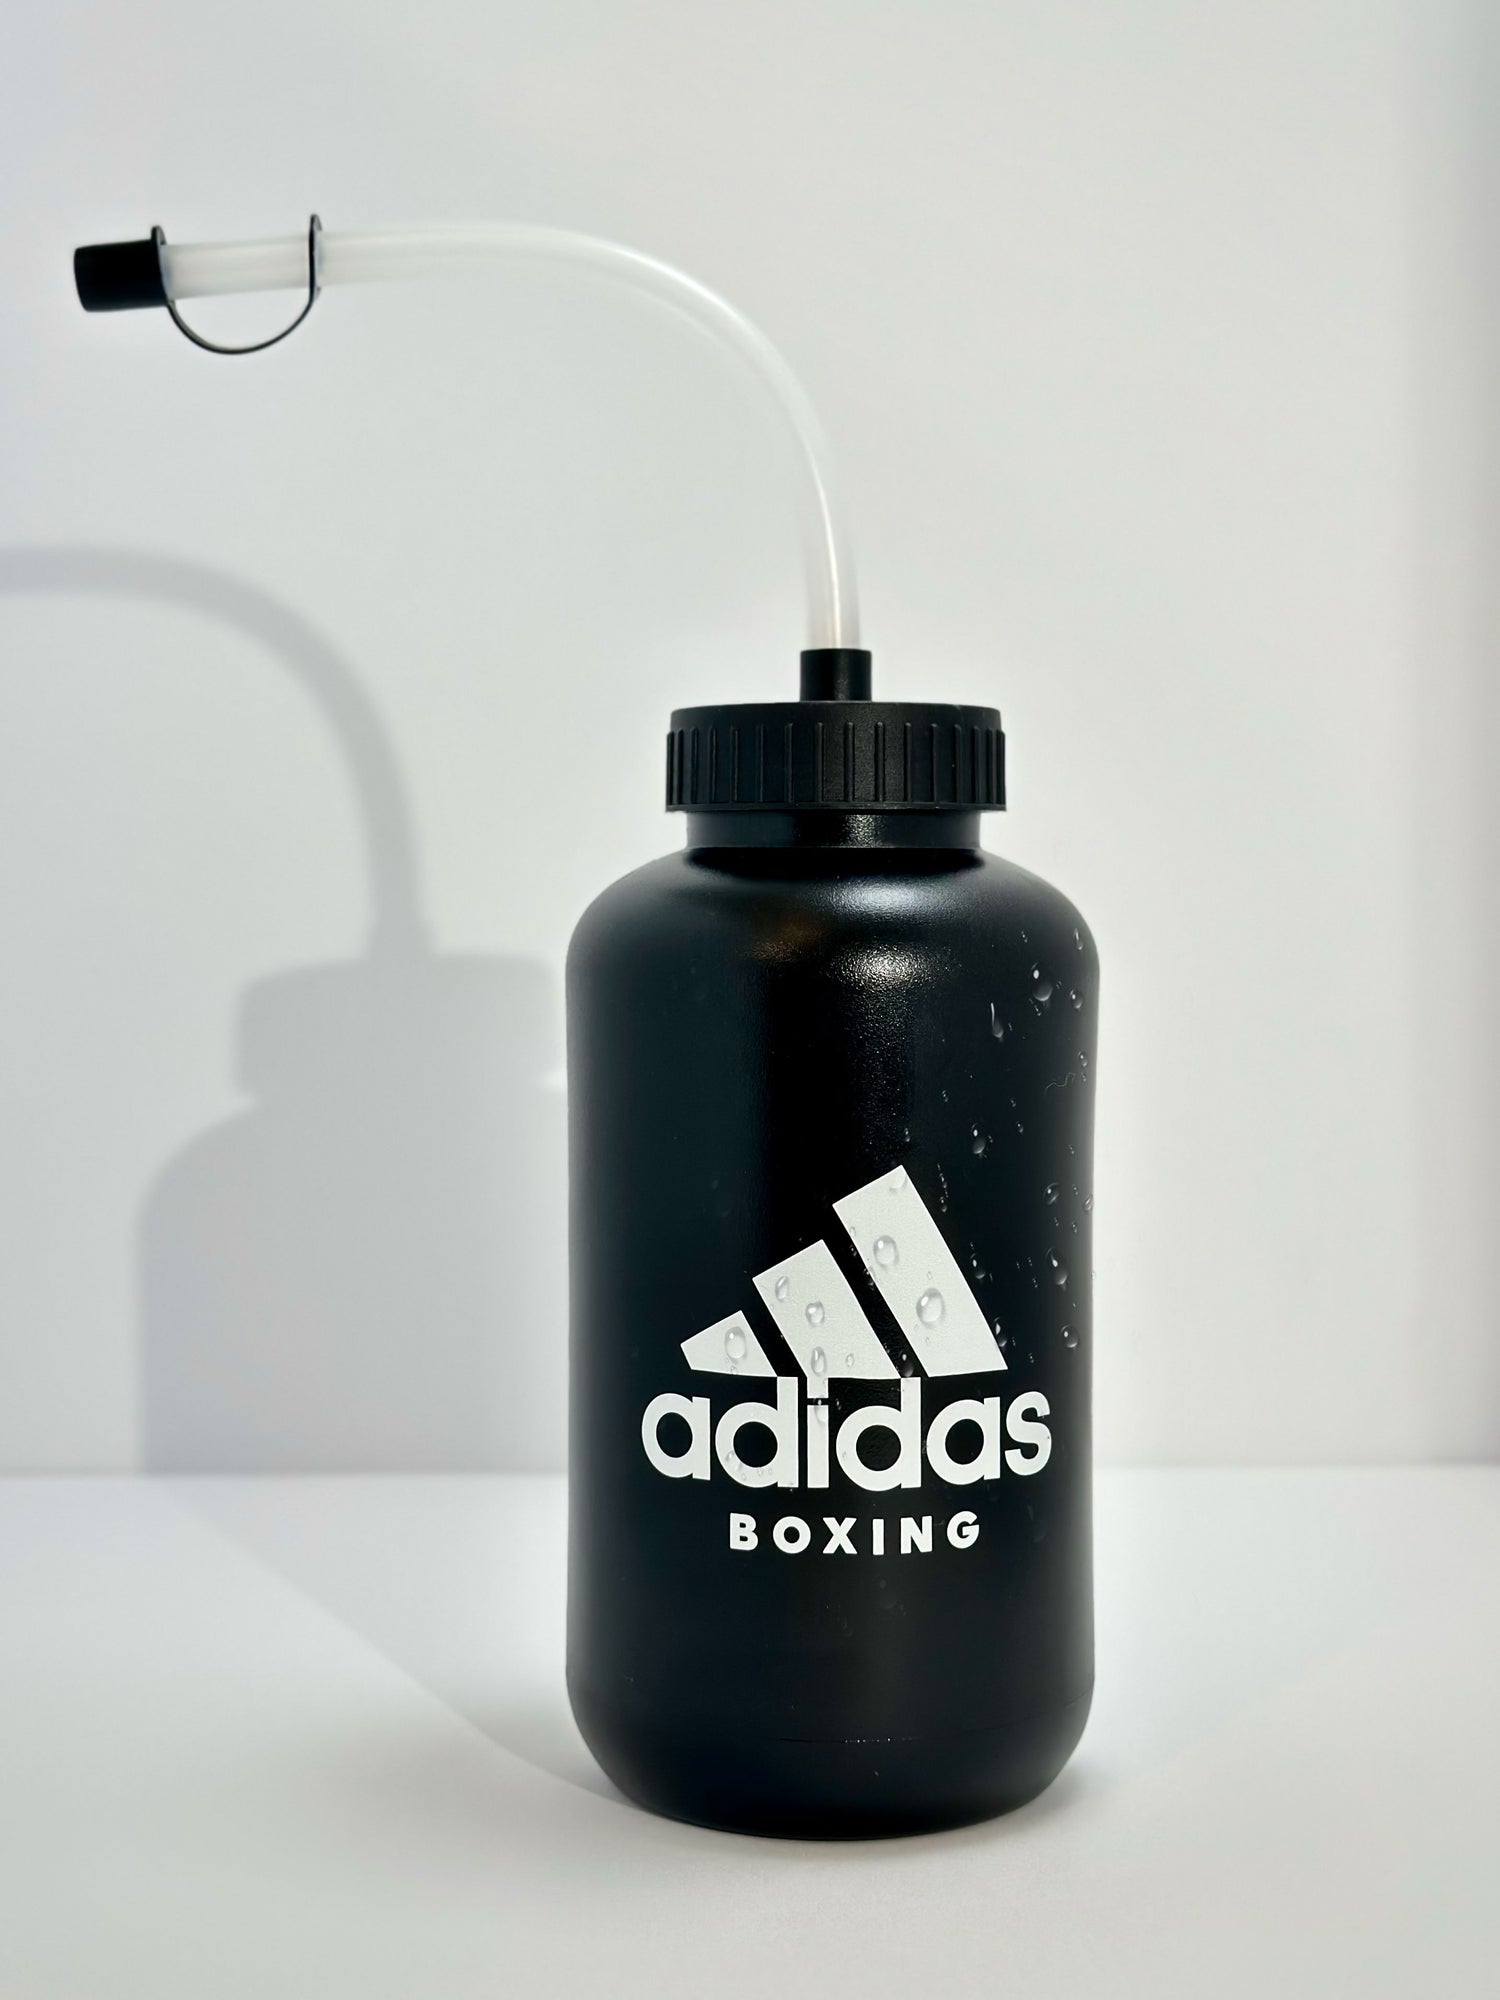 Adidas Black Boxing Water Bottle with Long Straw adiBWB011L, Ideal for Boxing Lacrosse Hockey Football Sports and Fitness Gym Hydration - Sports Leak Proof squeeze water jugs